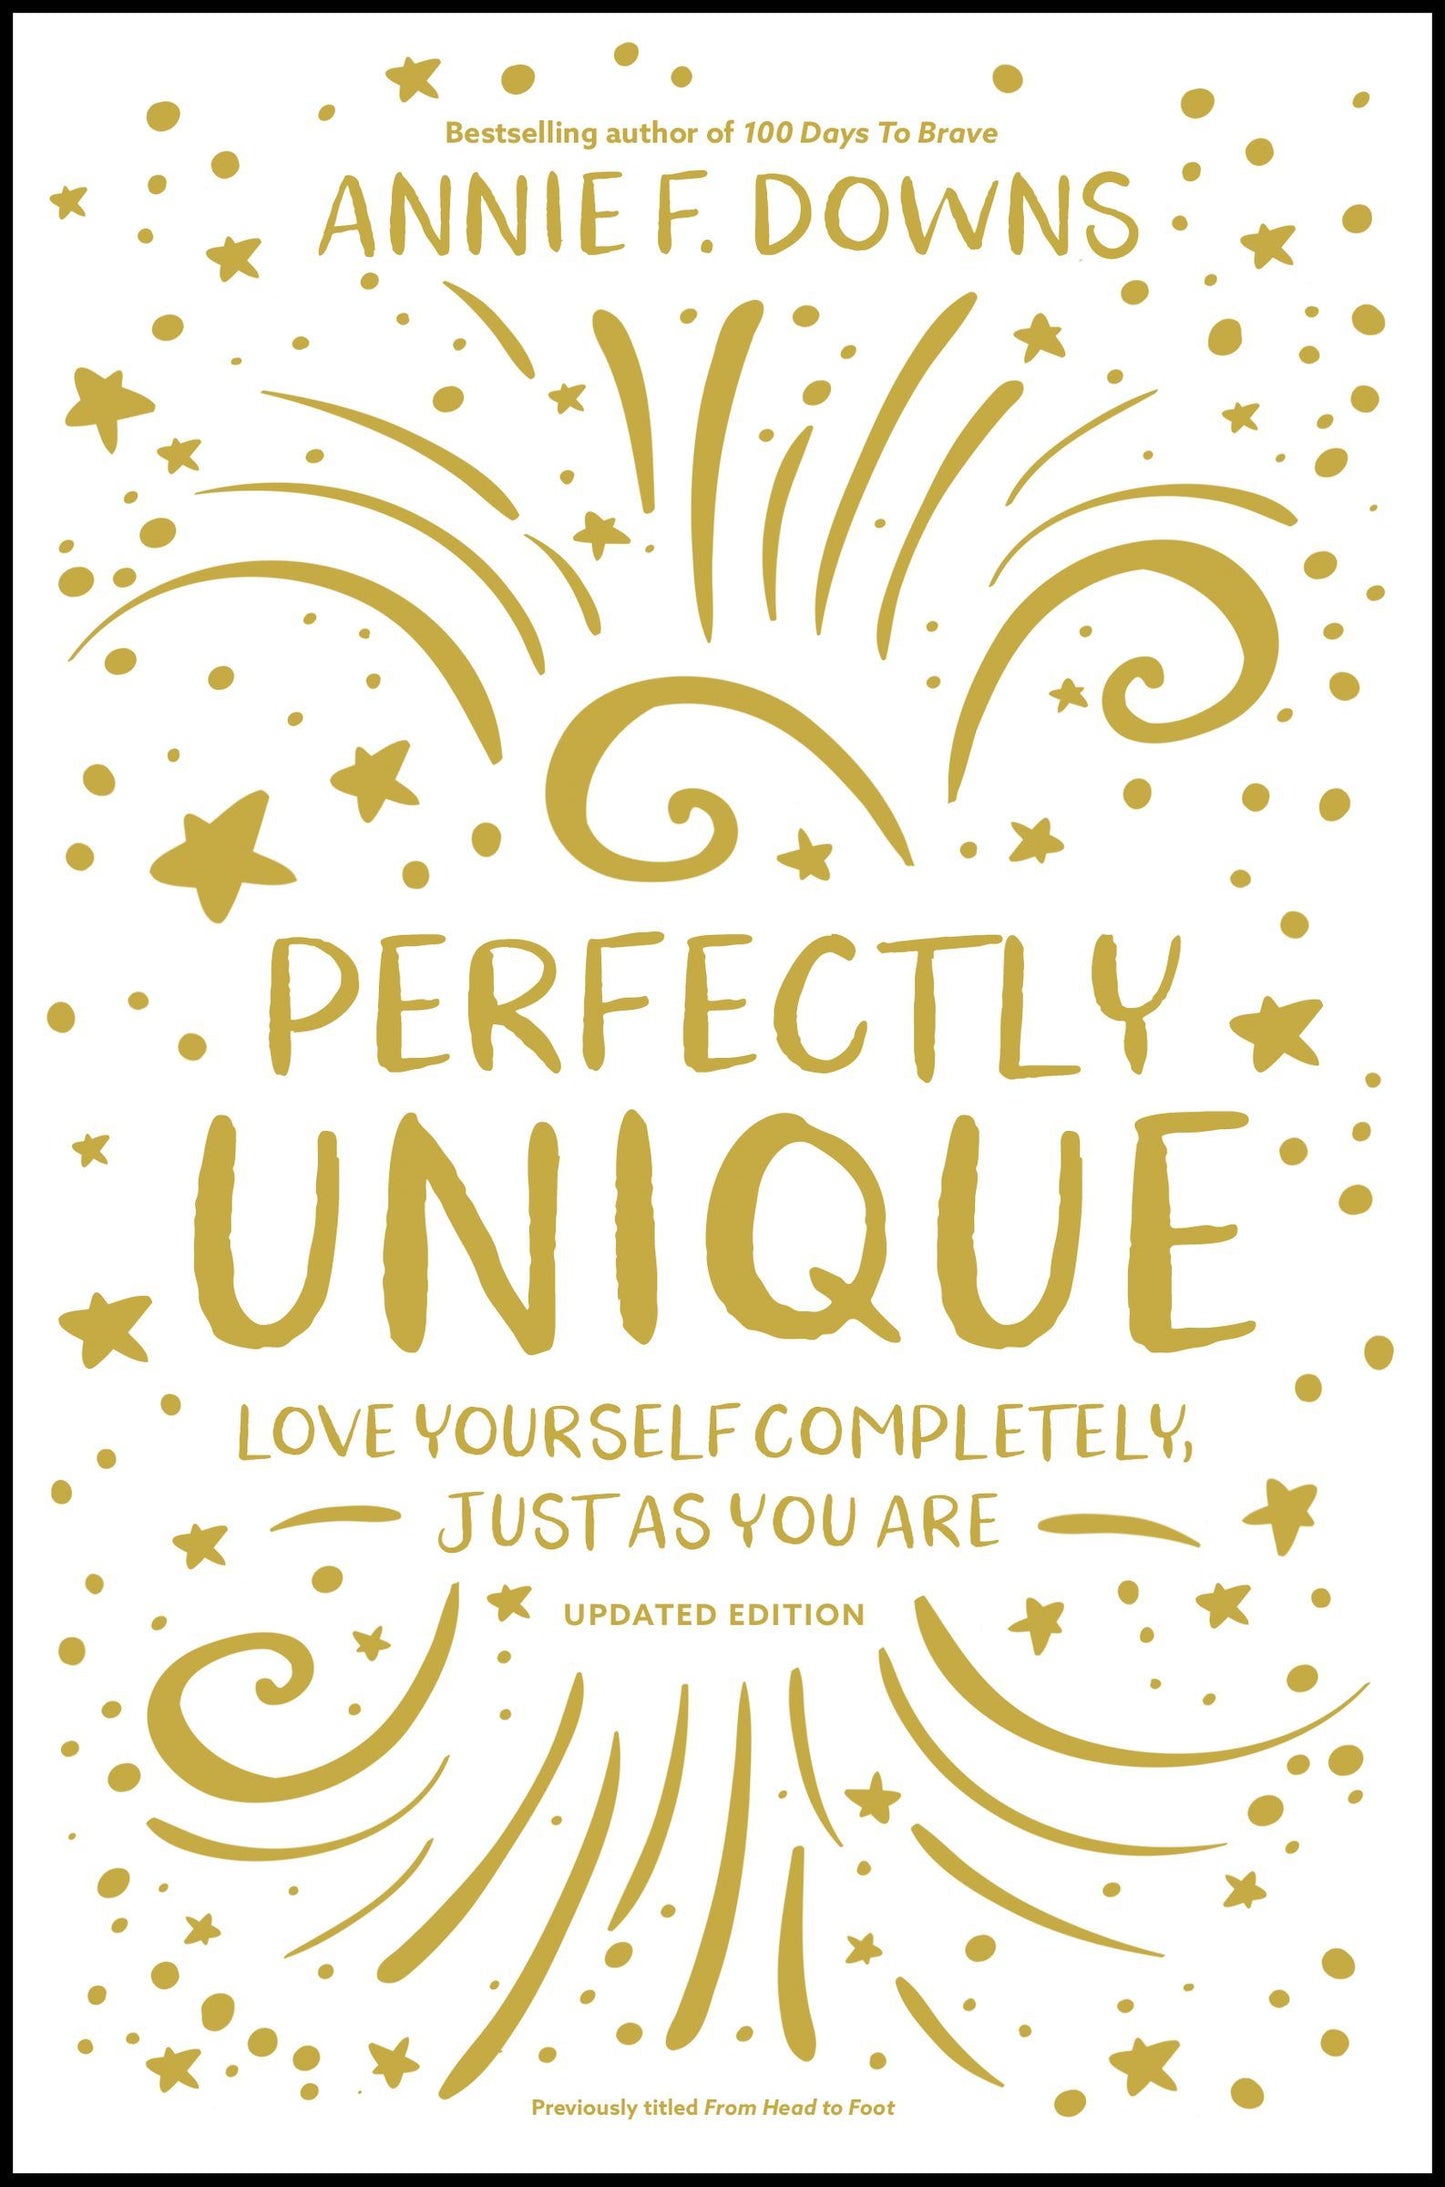 Perfectly Unique: Love Yourself Completely, Just As You Are - Annie F. Downs